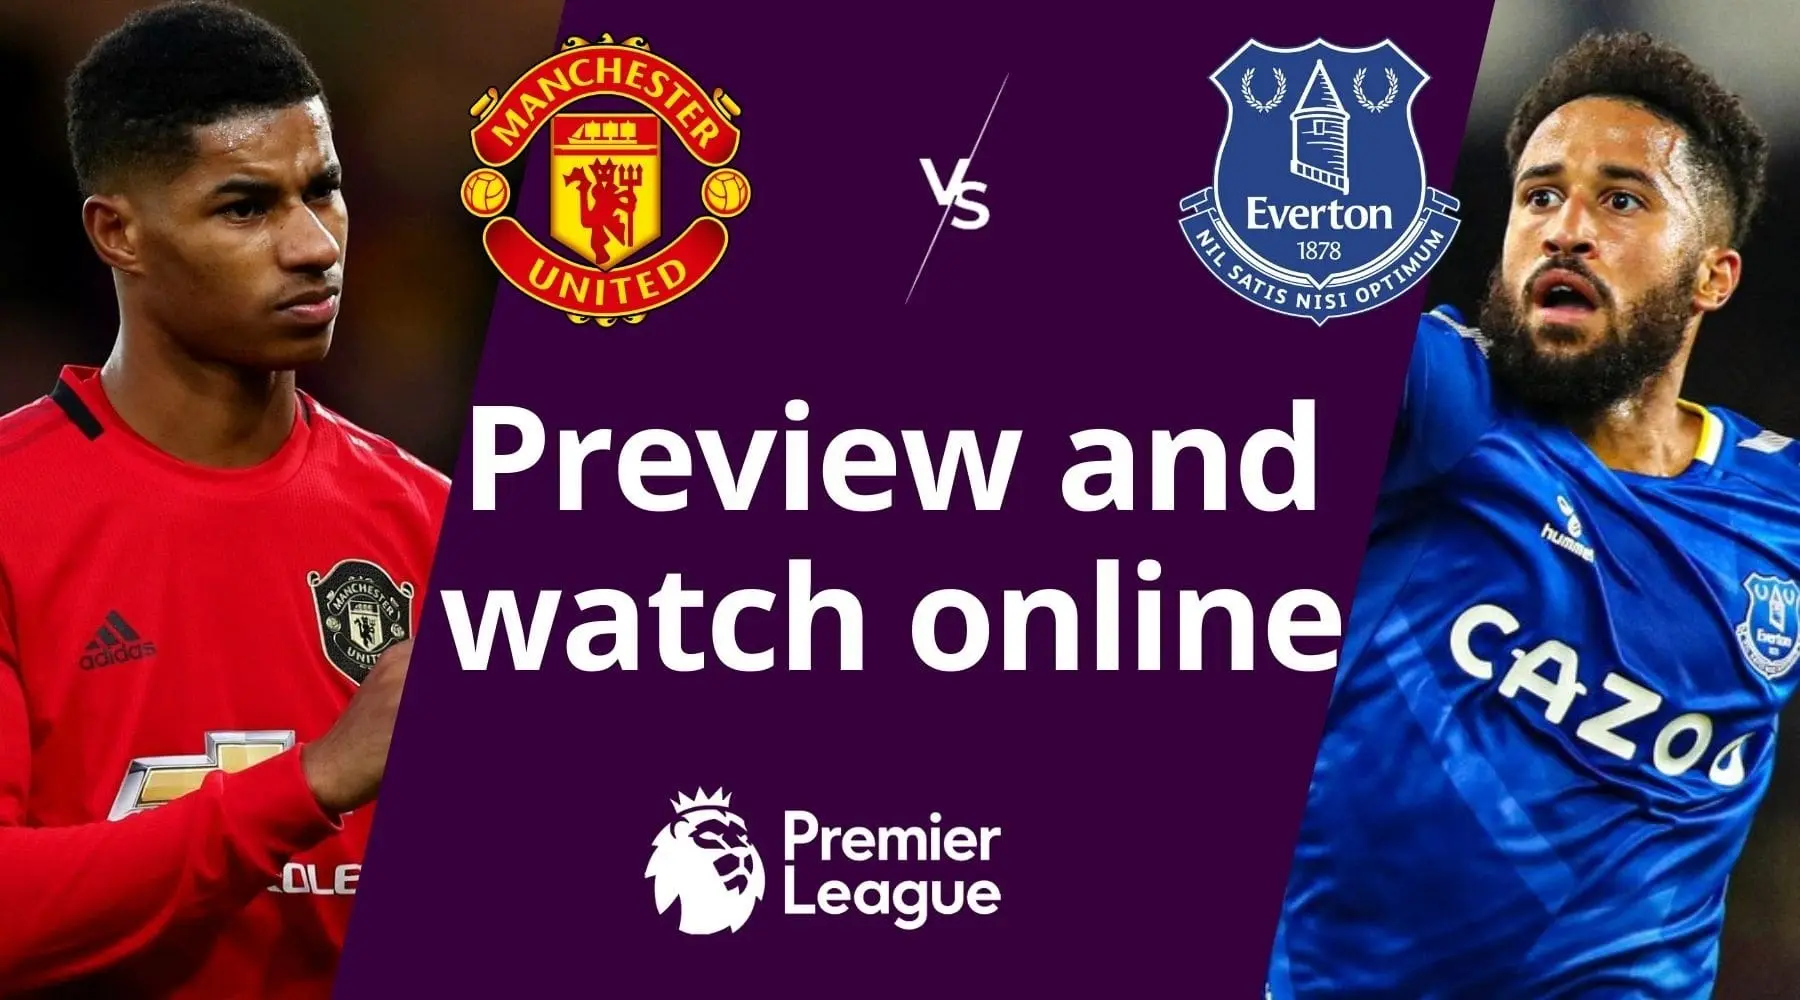 How to watch Man United vs Everton EPL clash and match preview